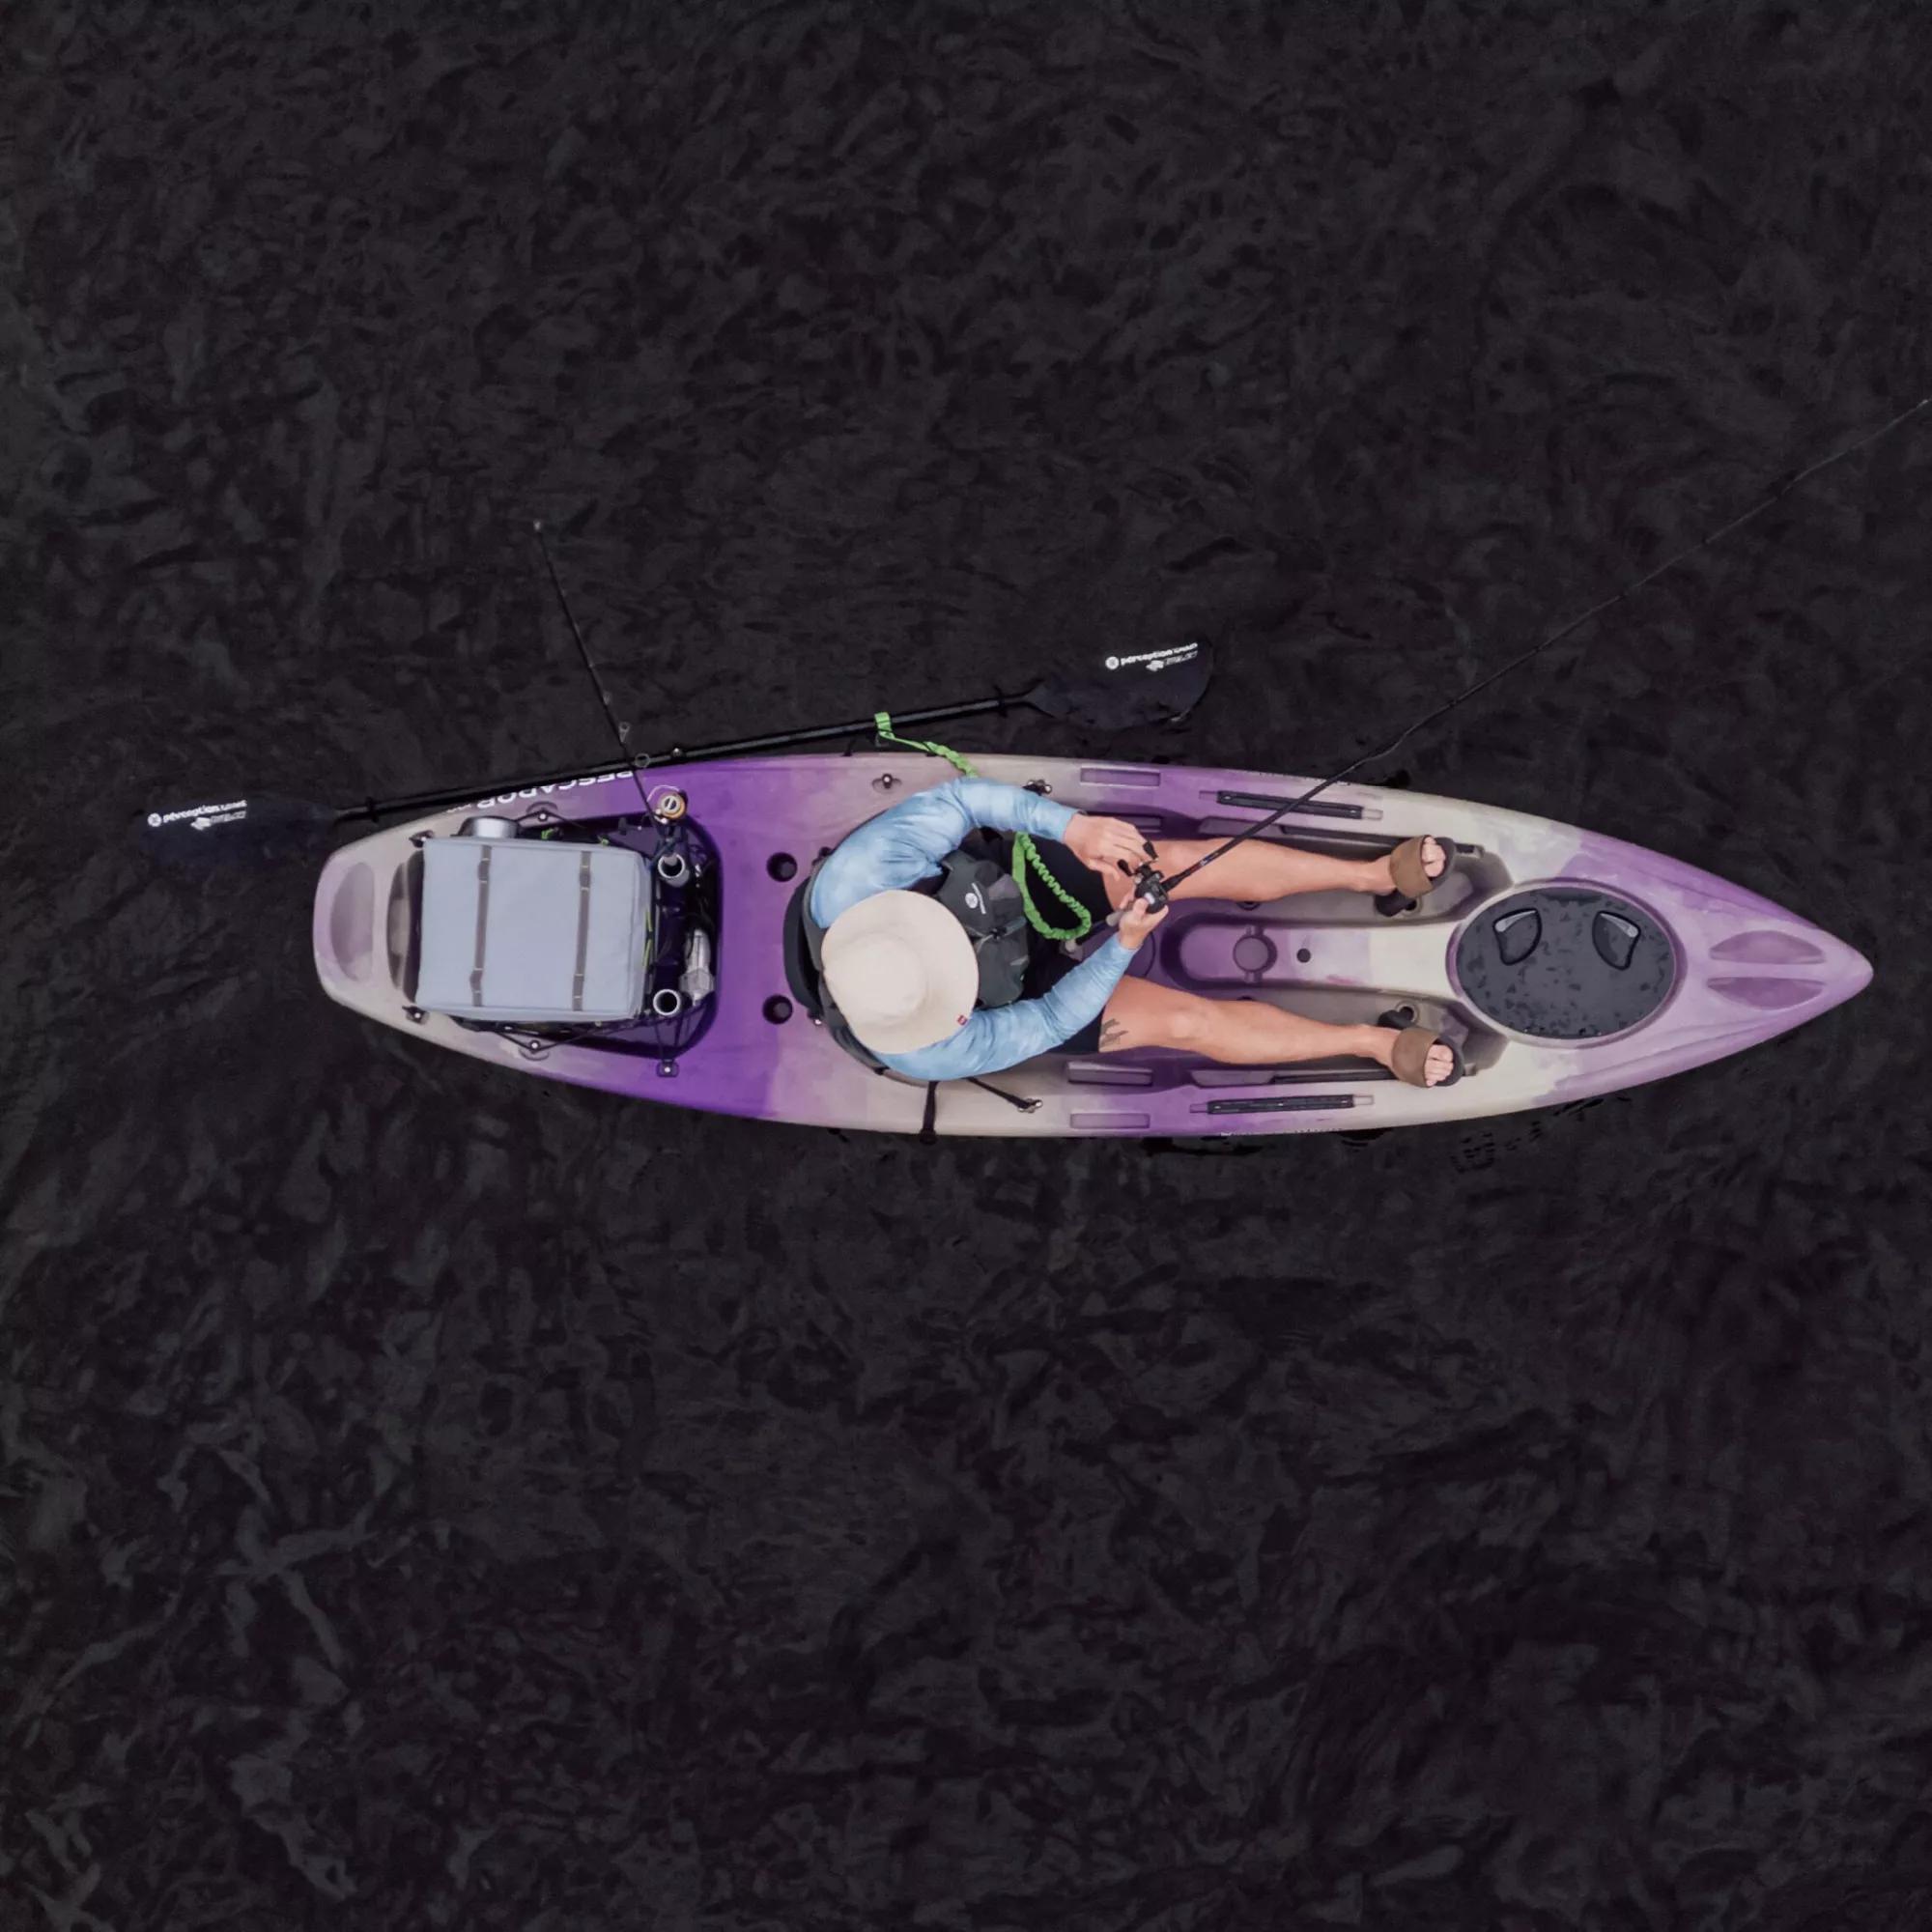 PERCEPTION - Pescador 12.0 Fishing Kayak - Discontinued color/model - Purple - 9350178173 - LIFE STYLE 2